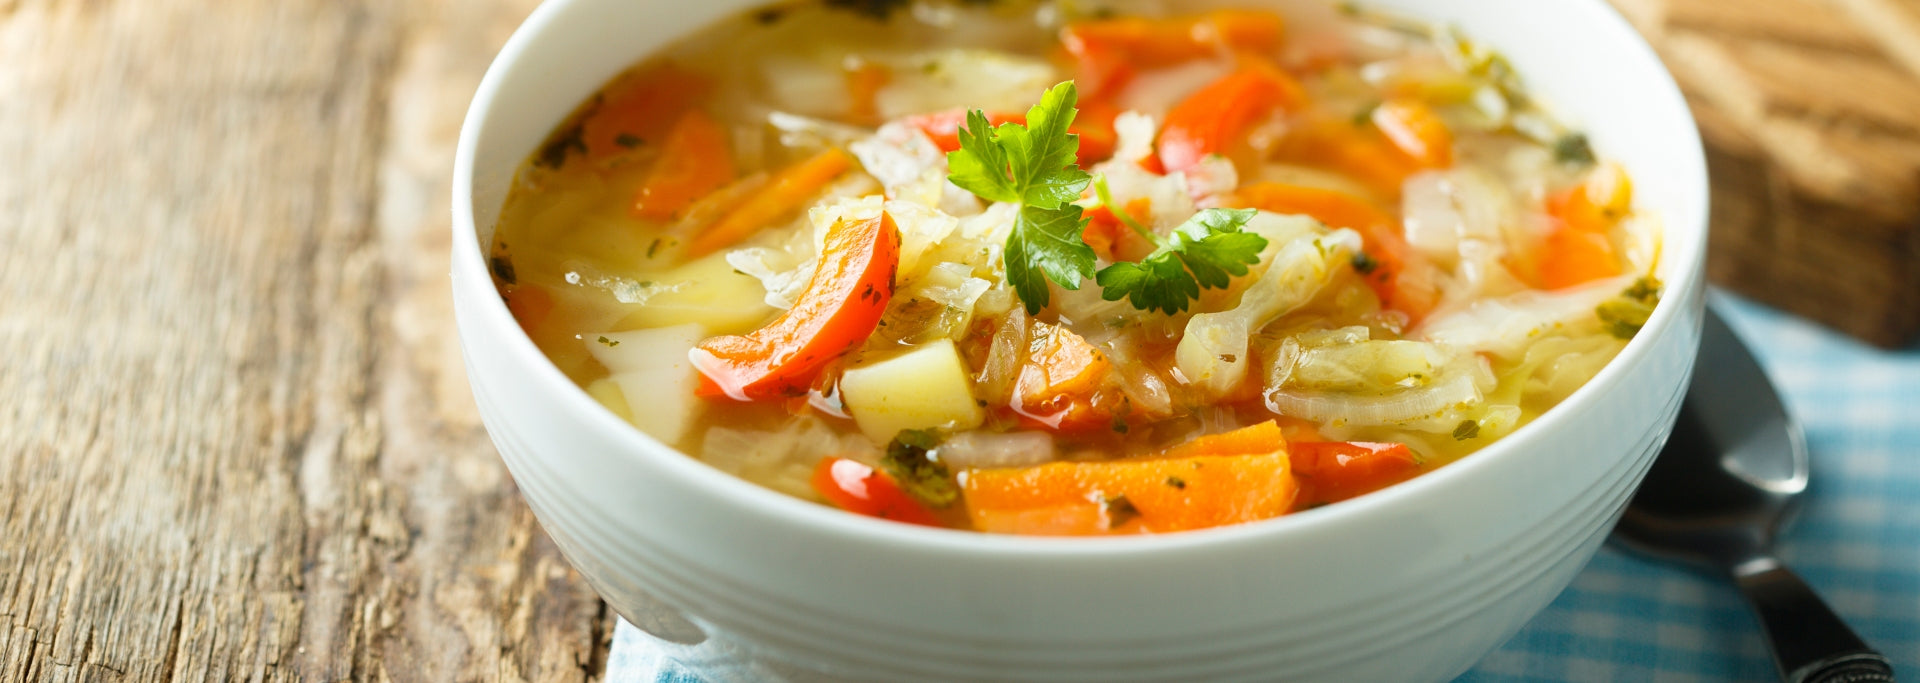 Winter Superfood Soup to Keep Flu Away and Your Skin Glowing